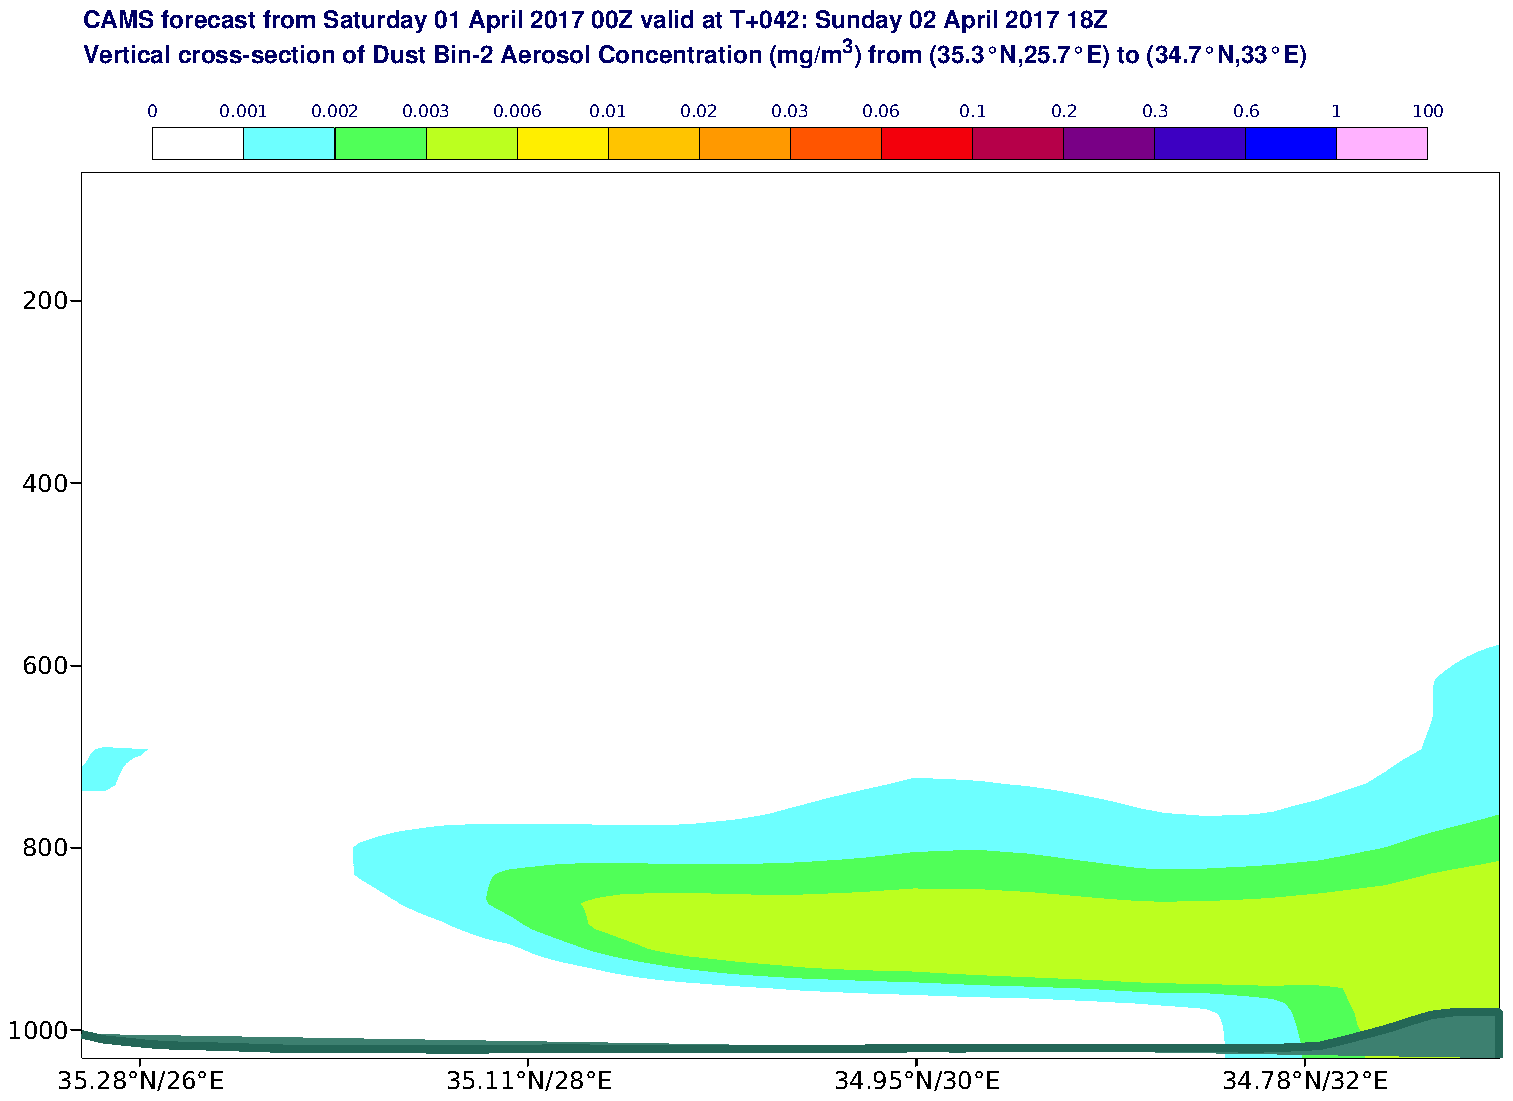 Vertical cross-section of Dust Bin-2 Aerosol Concentration (mg/m3) valid at T42 - 2017-04-02 18:00